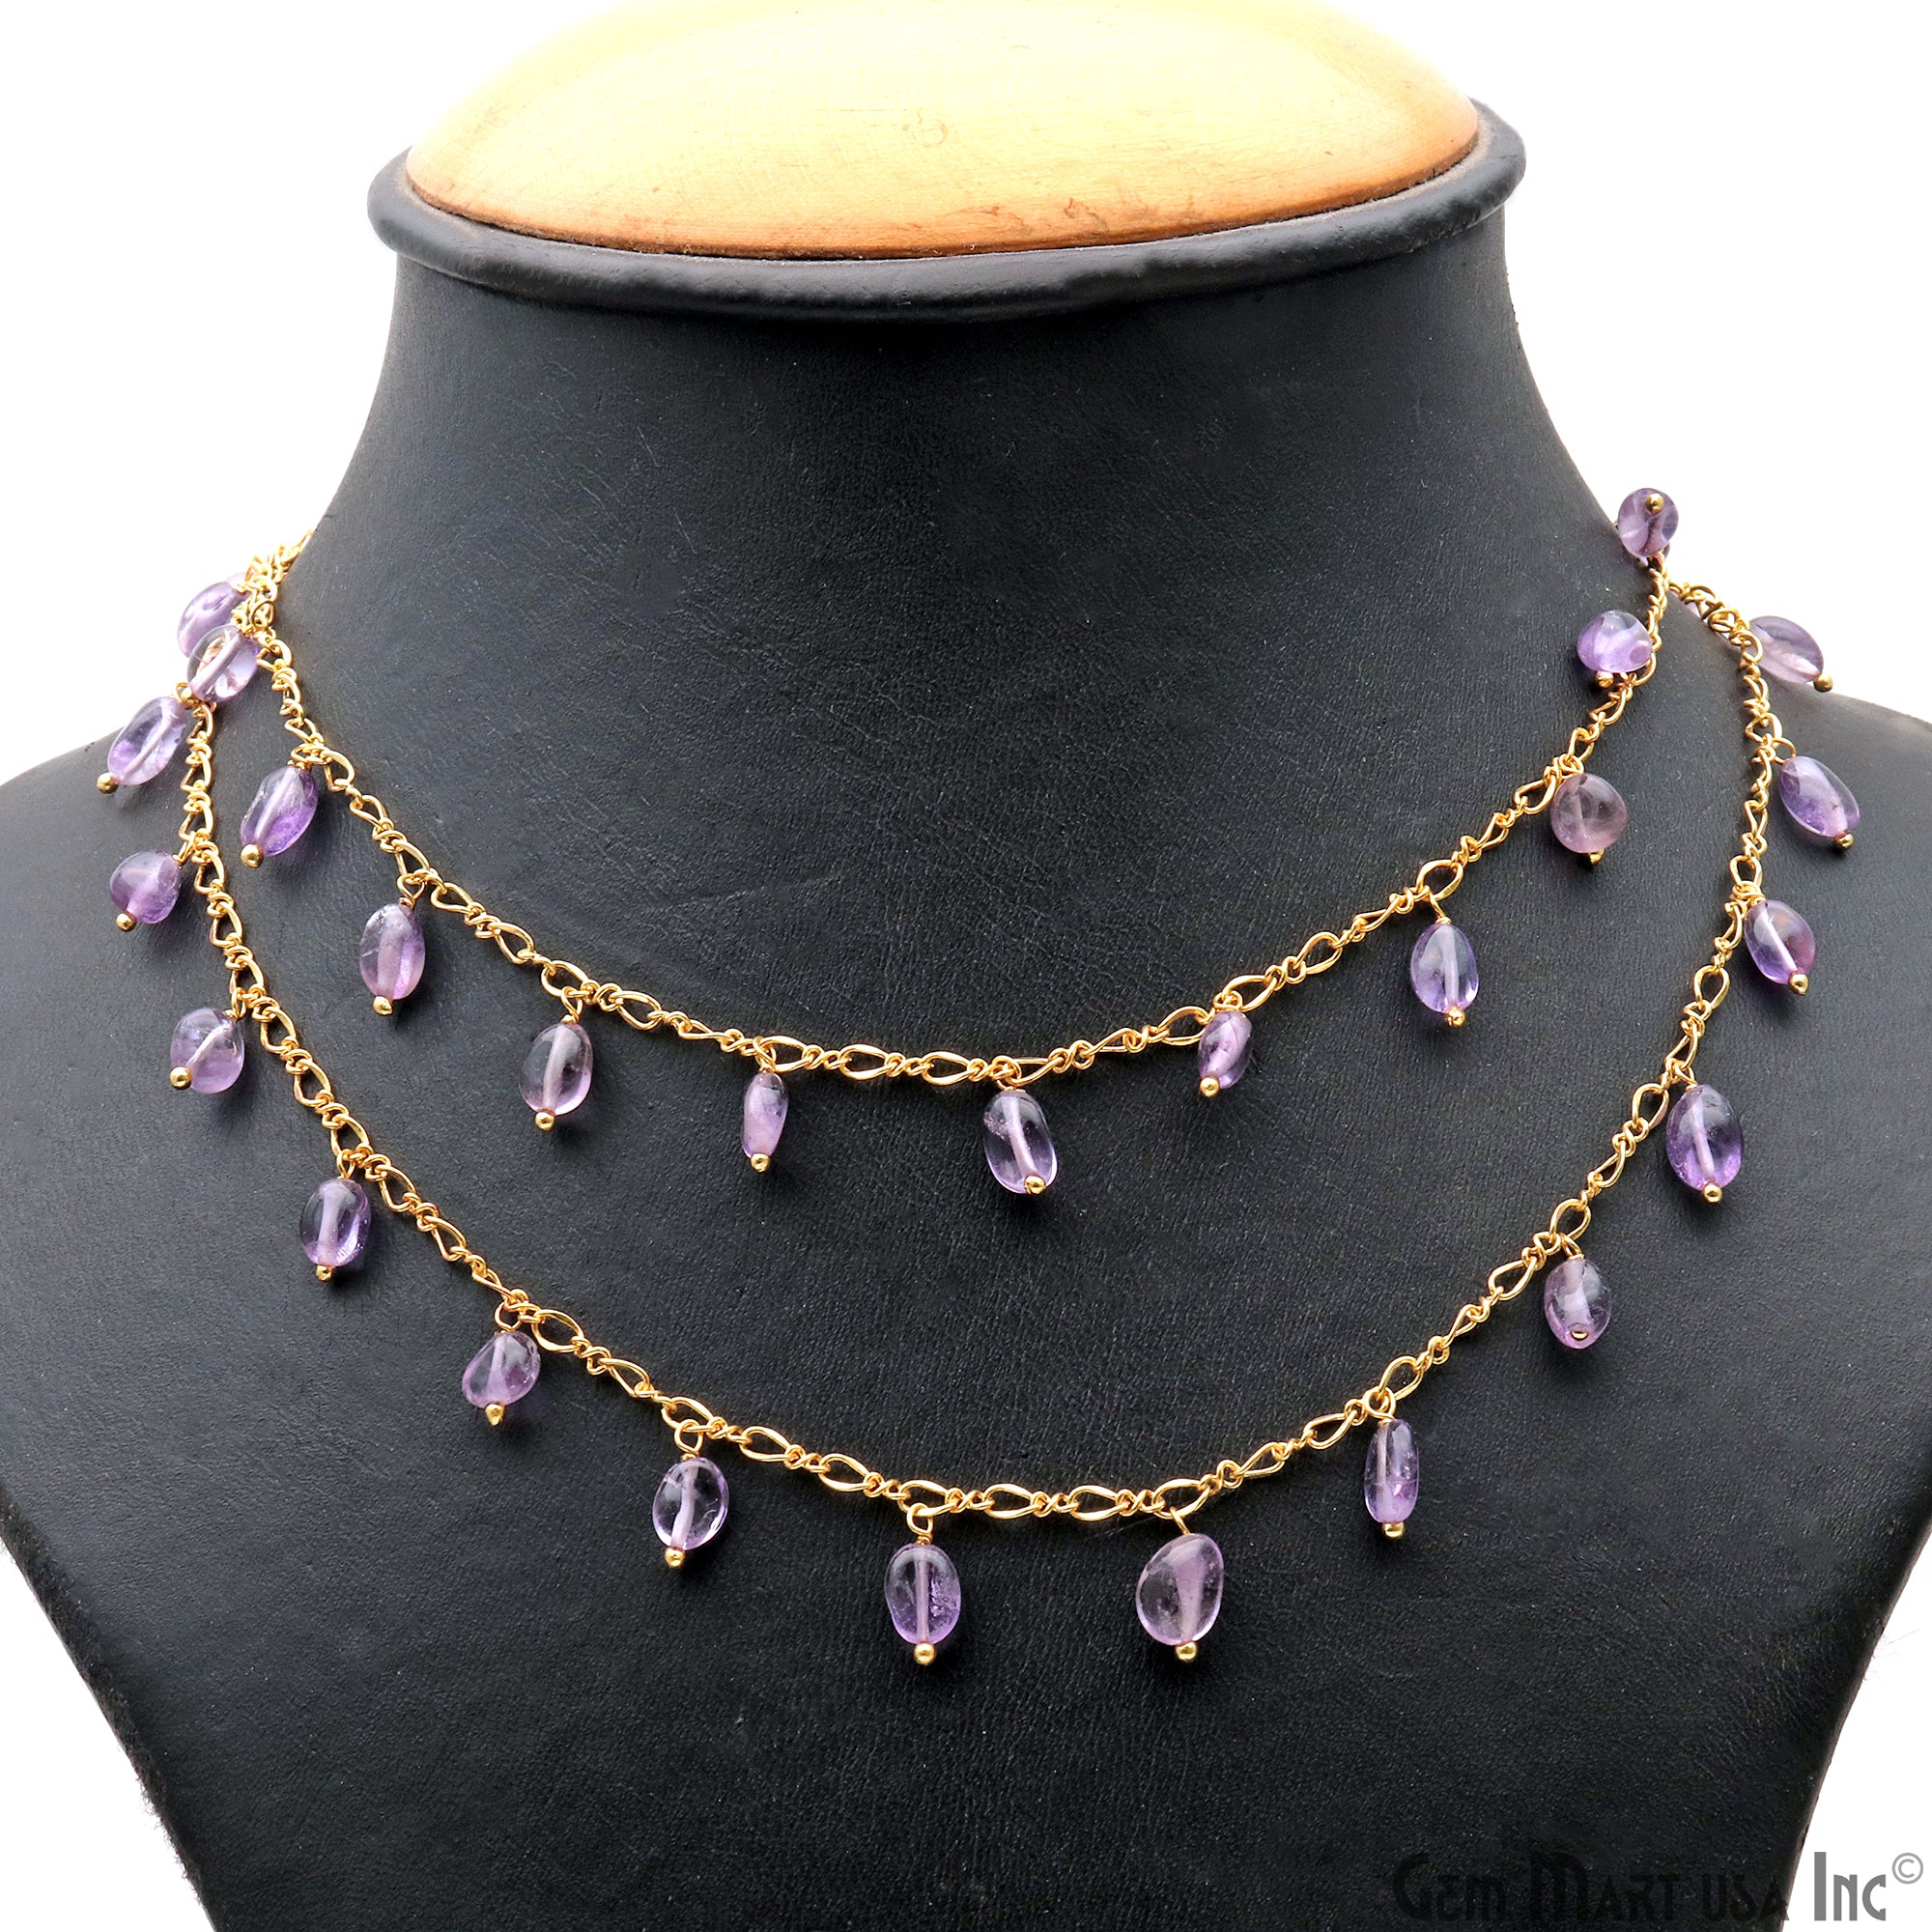 Amethyst Tumble Beads 8x5mm Gold Plated Cluster Dangle Chain